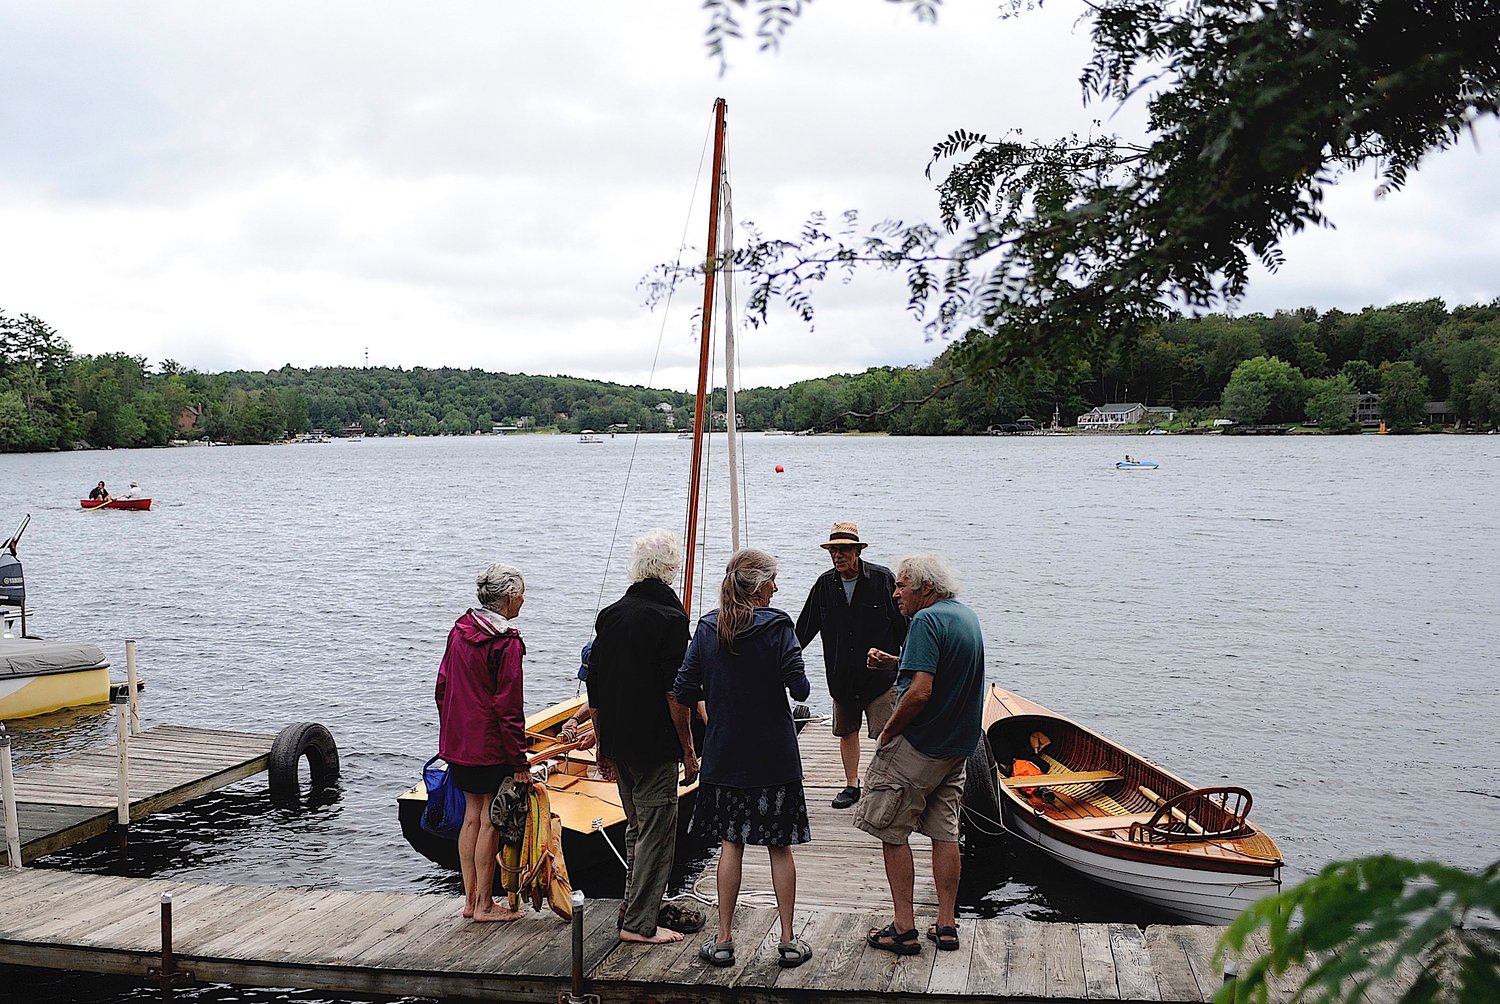 Dockside chat. Members of the Beechwoods Yacht Club and friends gather at the Fat Lady Café dock, as Joe and Elise Freda cross the lake in their newest acquisition, a restored 1938 Penn Yan Cartopper.